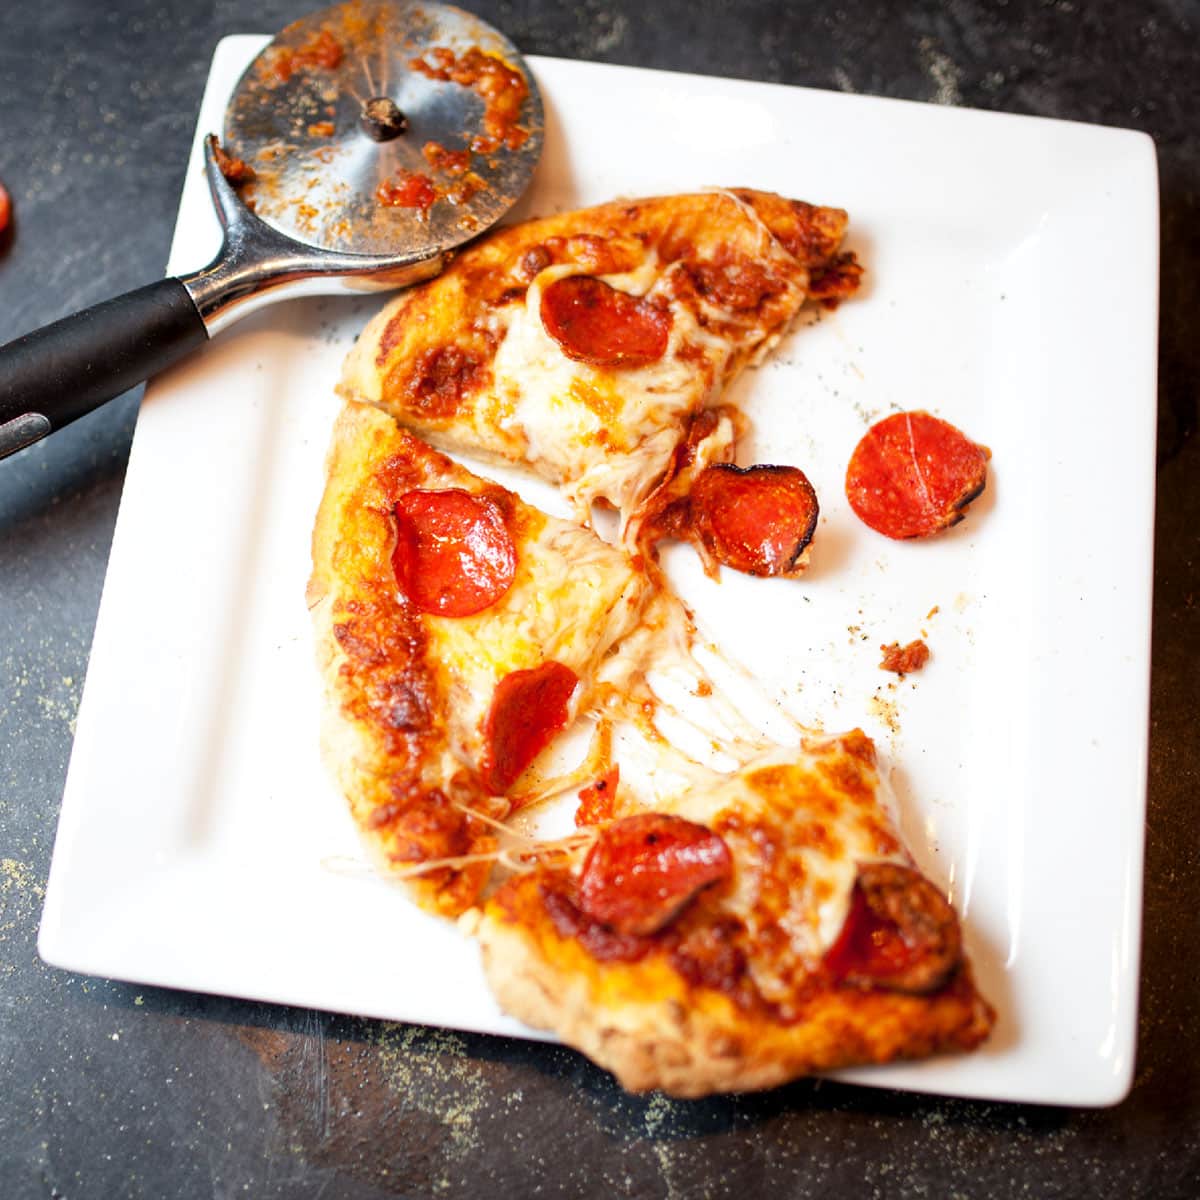 Anyone who's ever had greasy pizza knows that it's a total letdown. But with these tips, you can make your pizza taste great every time – without all the grease!